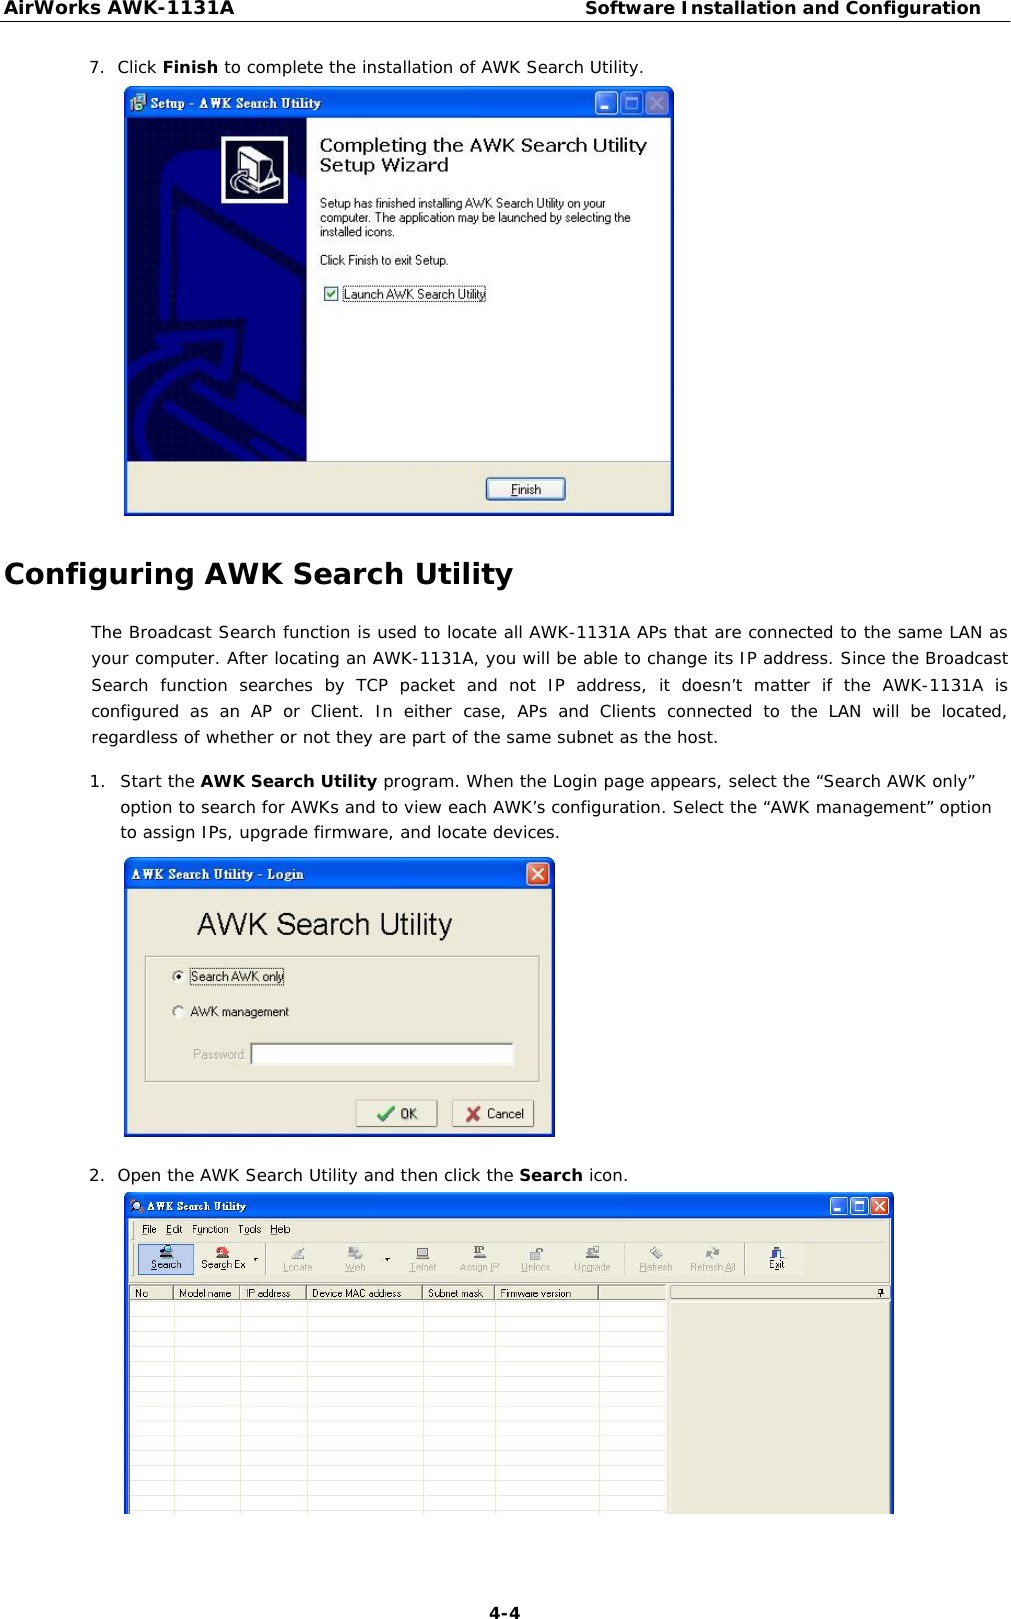 AirWorks AWK-1131A Software Installation and Configuration  7.  Click Finish to complete the installation of AWK Search Utility.                       Configuring AWK Search Utility  The Broadcast Search function is used to locate all AWK-1131A APs that are connected to the same LAN as your computer. After locating an AWK-1131A, you will be able to change its IP address. Since the Broadcast Search function searches by TCP packet and not IP address, it doesn’t matter if the AWK-1131A is configured as an AP or Client. In either case, APs and Clients connected to the LAN will be located, regardless of whether or not they are part of the same subnet as the host.  1. Start the AWK Search Utility program. When the Login page appears, select the “Search AWK only” option to search for AWKs and to view each AWK’s configuration. Select the “AWK management” option to assign IPs, upgrade firmware, and locate devices.                 2.  Open the AWK Search Utility and then click the Search icon.                     4-4 